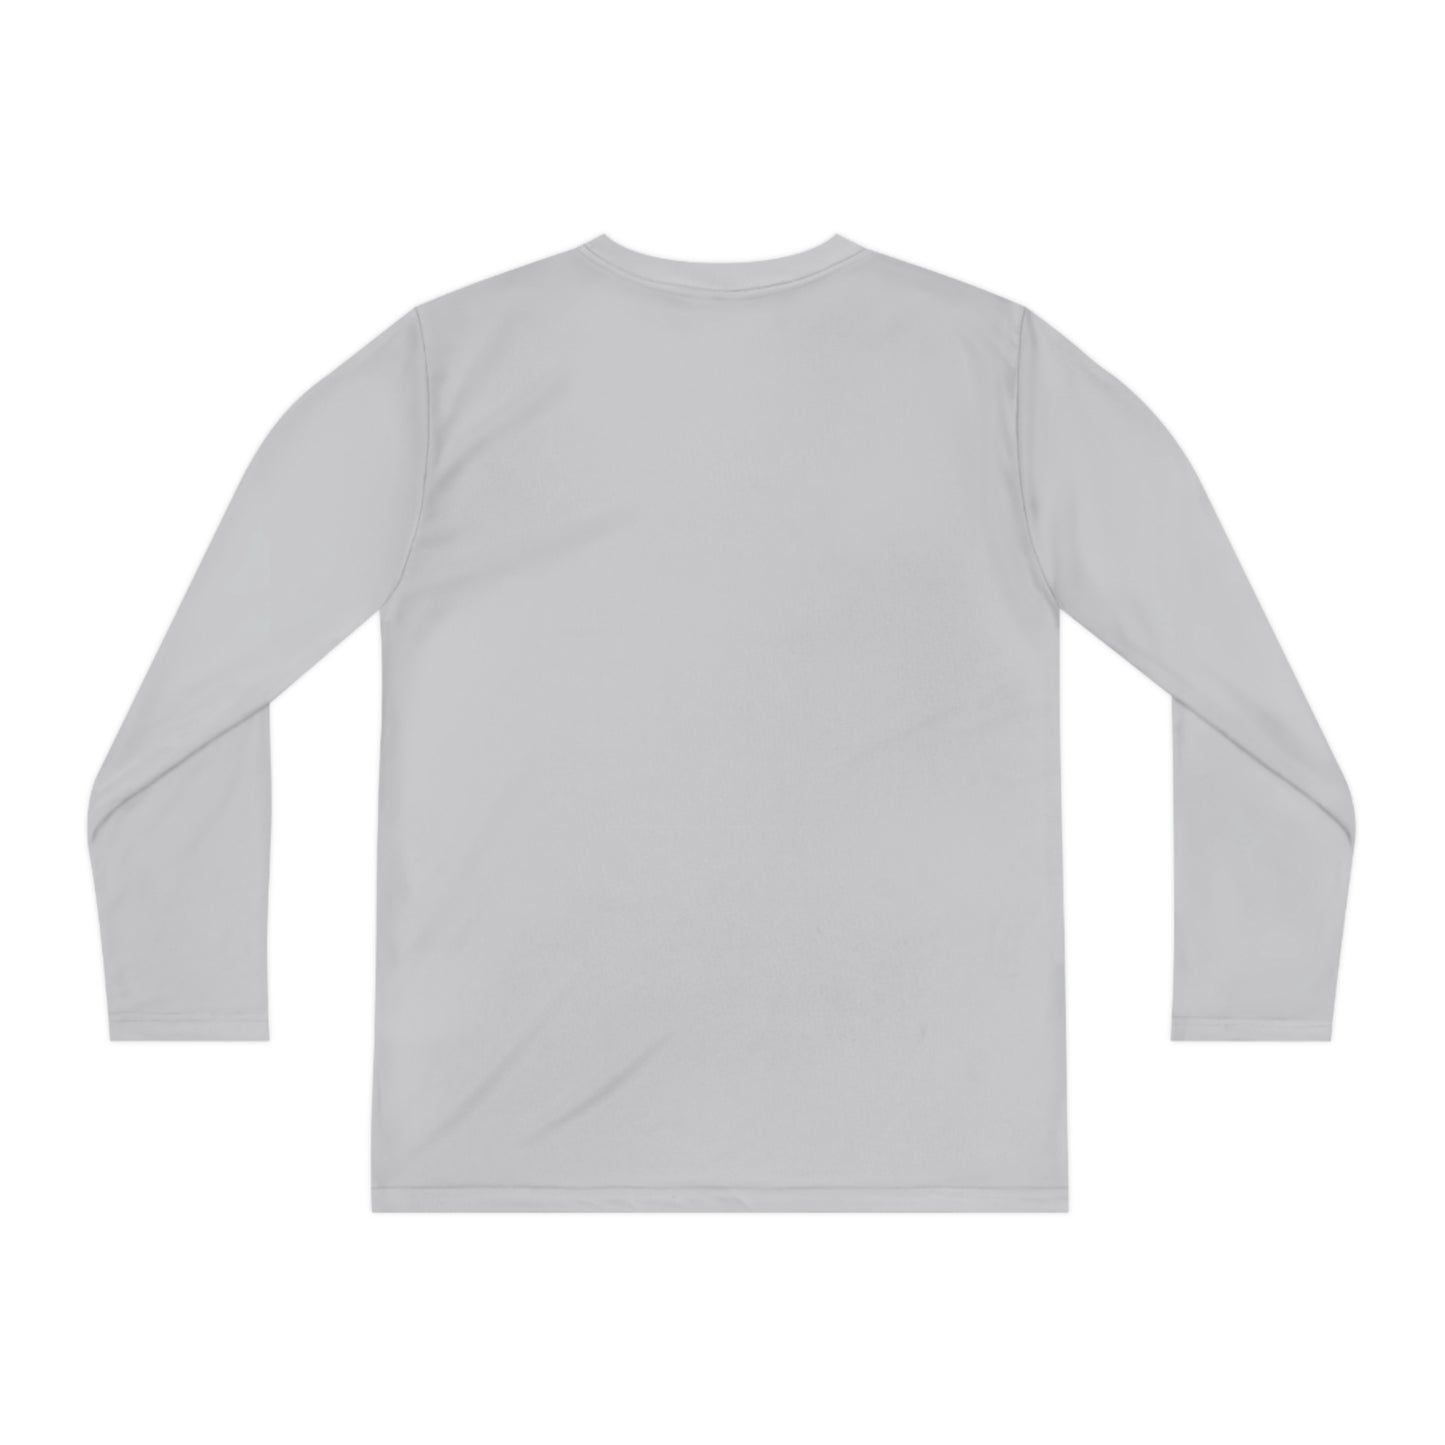 Youth Flag Dry-Fit Longsleeve [Design 3]